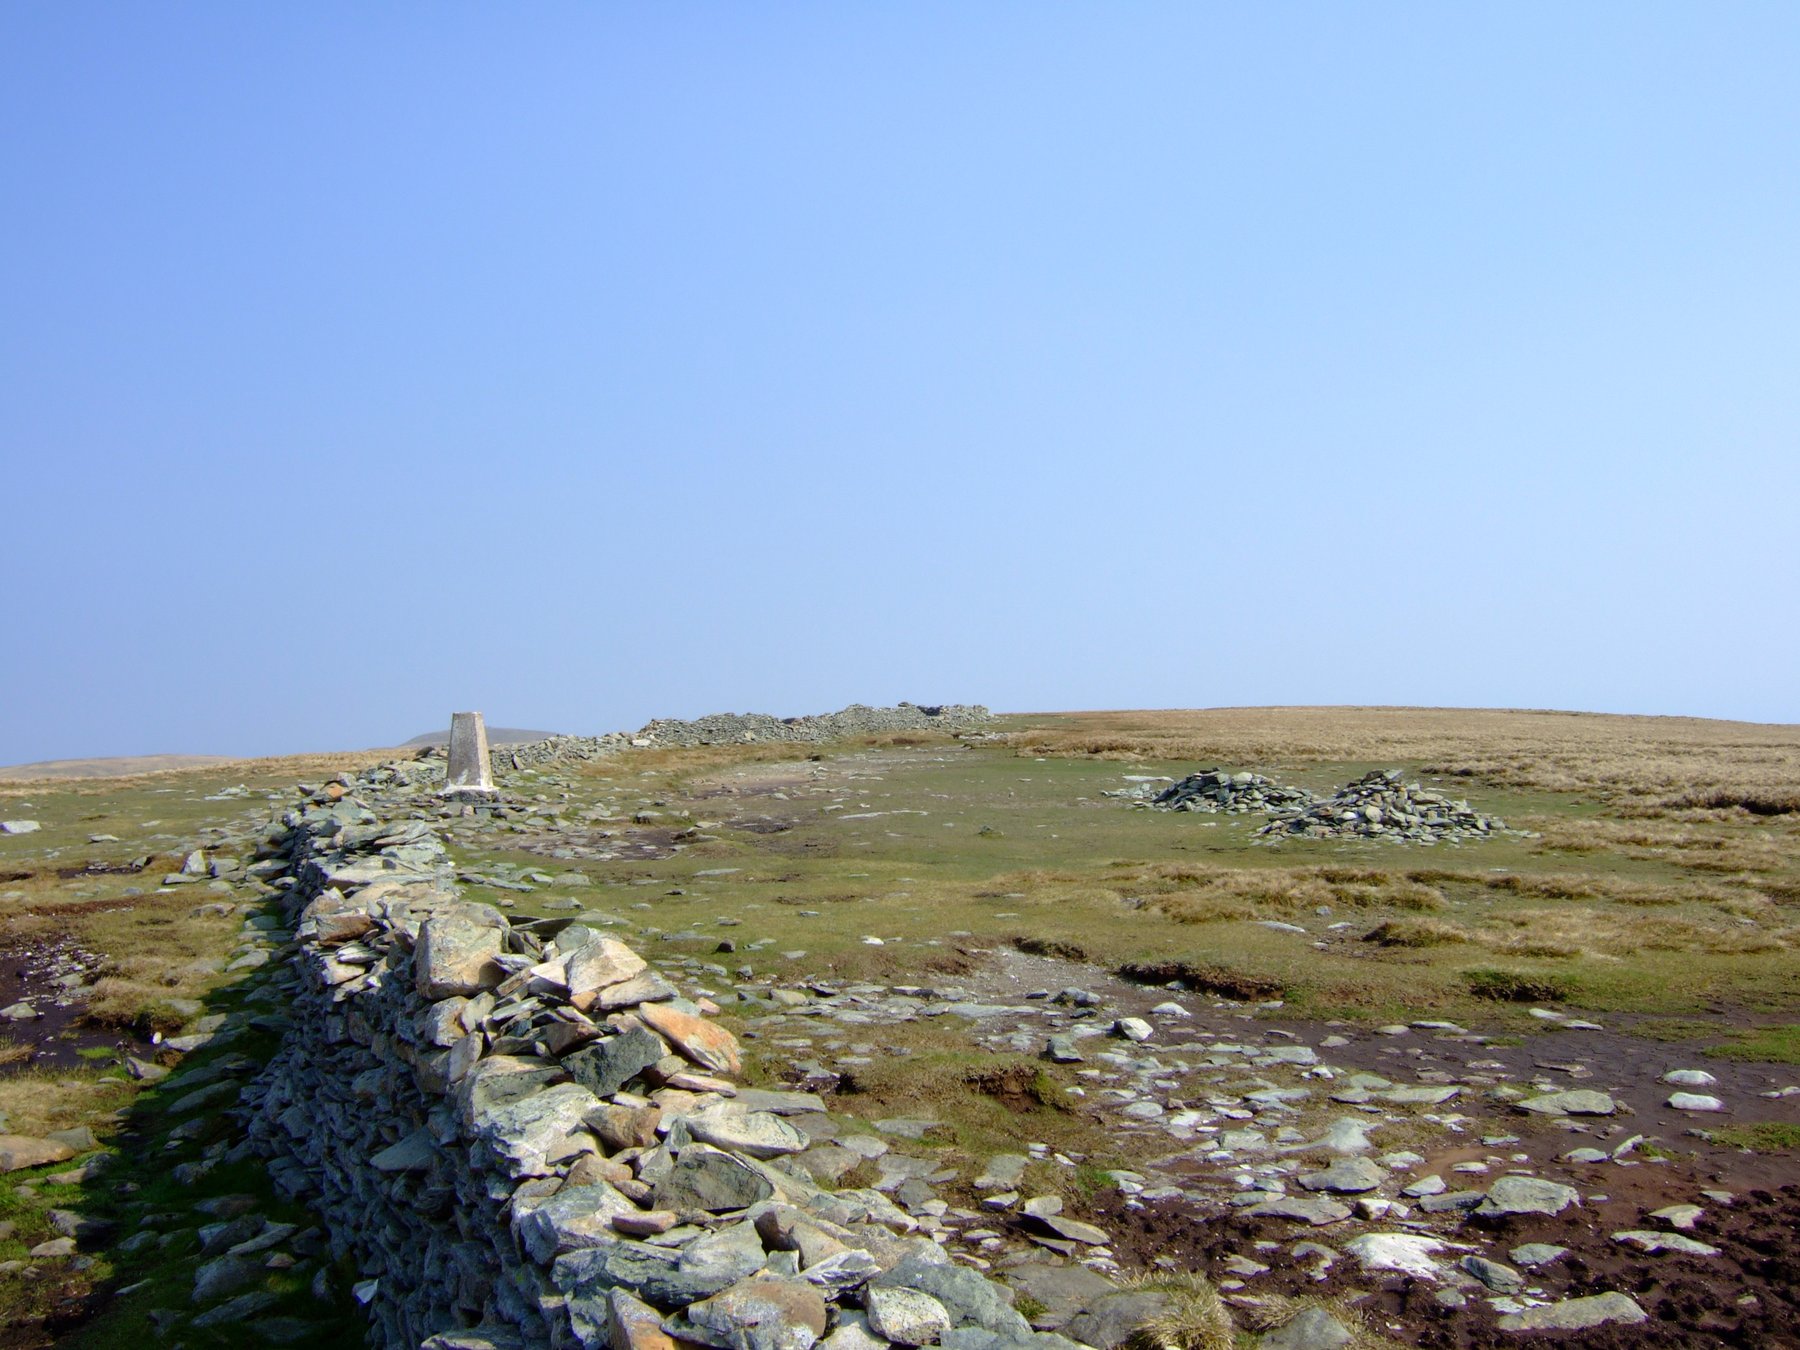 The Kentmere Round